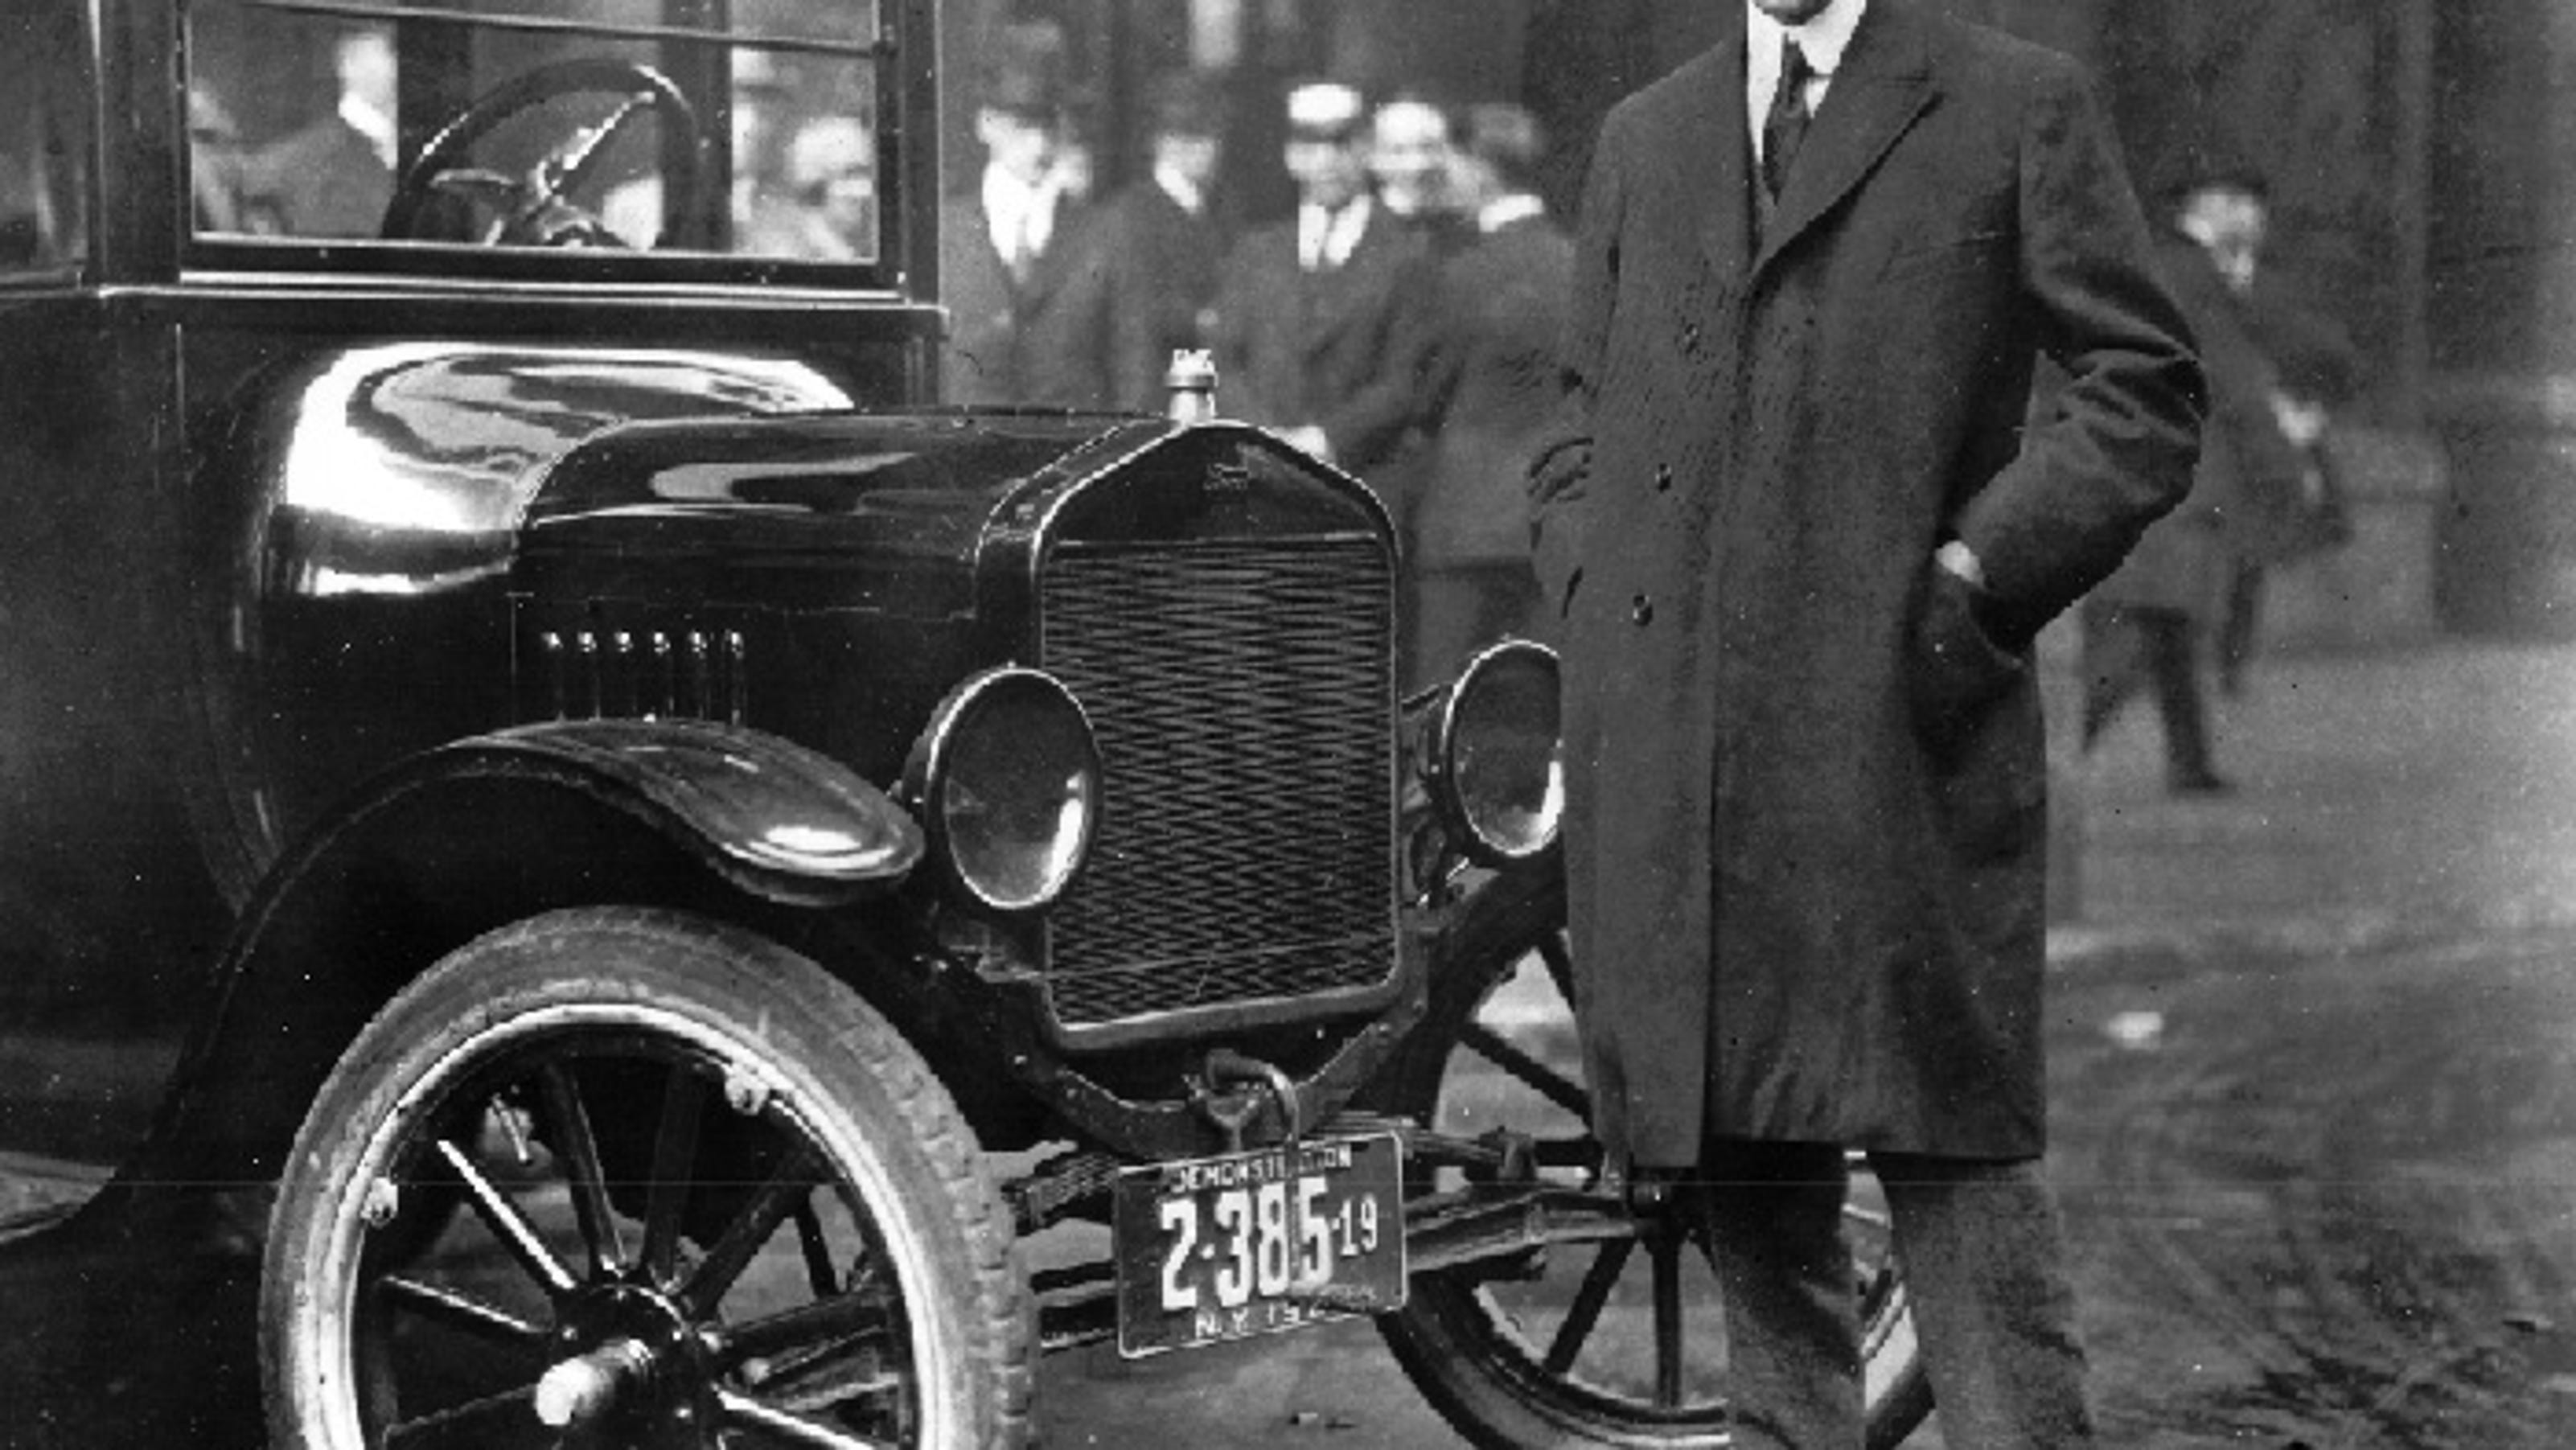 Henry ford raising wages #4